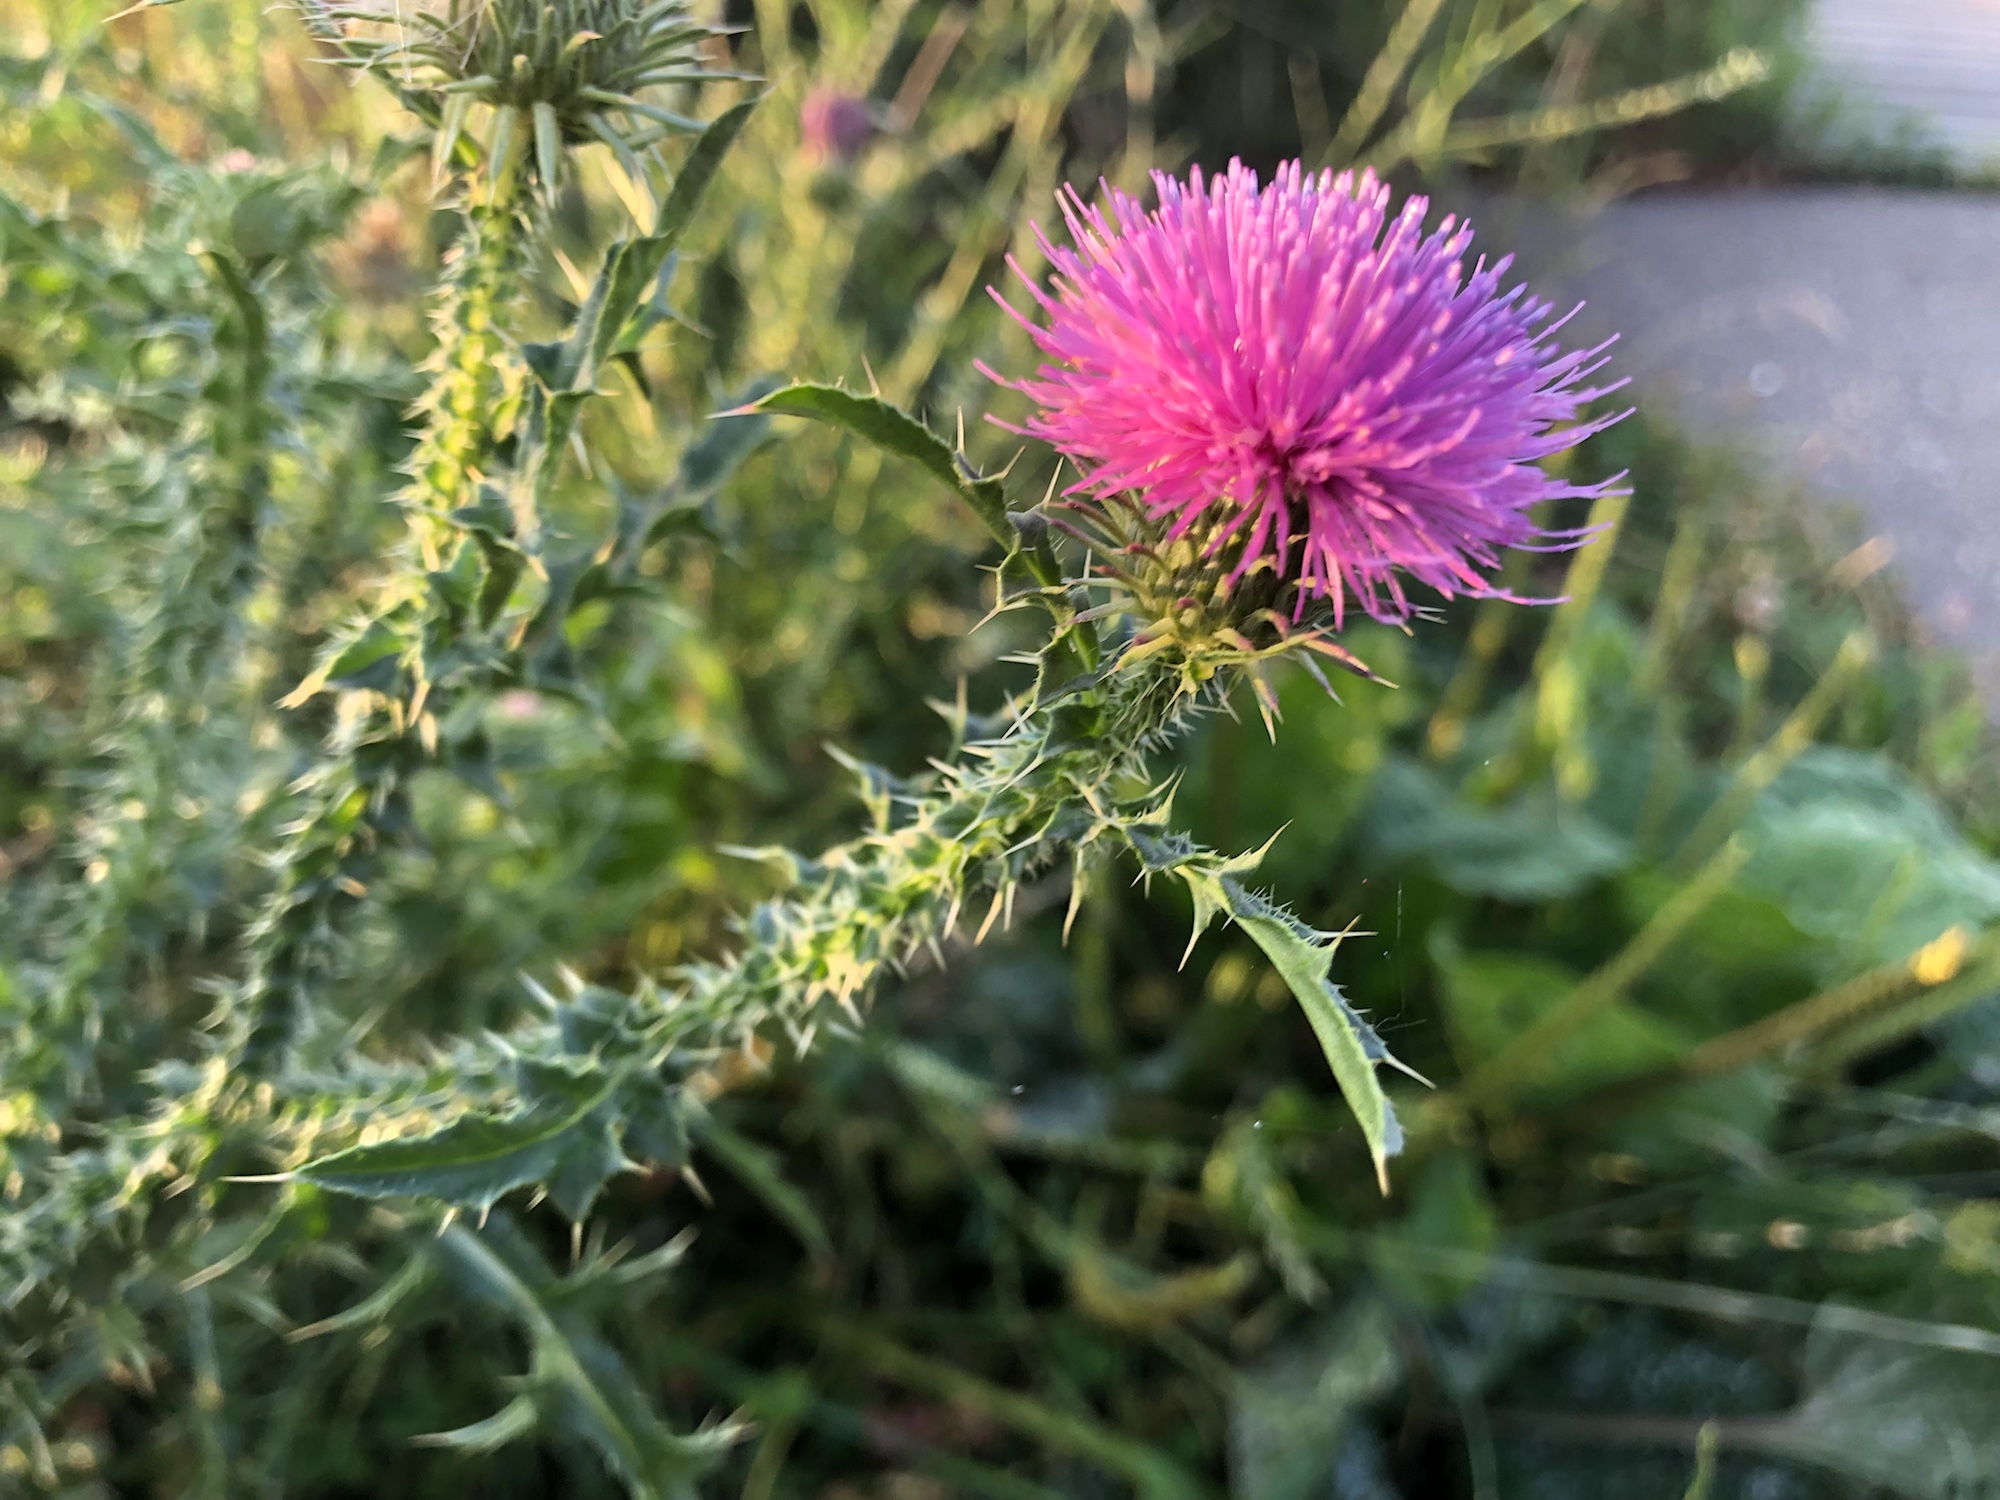 Plumeless Thistle by Wingra Boats on shore of Lake Wingra in Madison, Wisconsin on July 15, 2019.